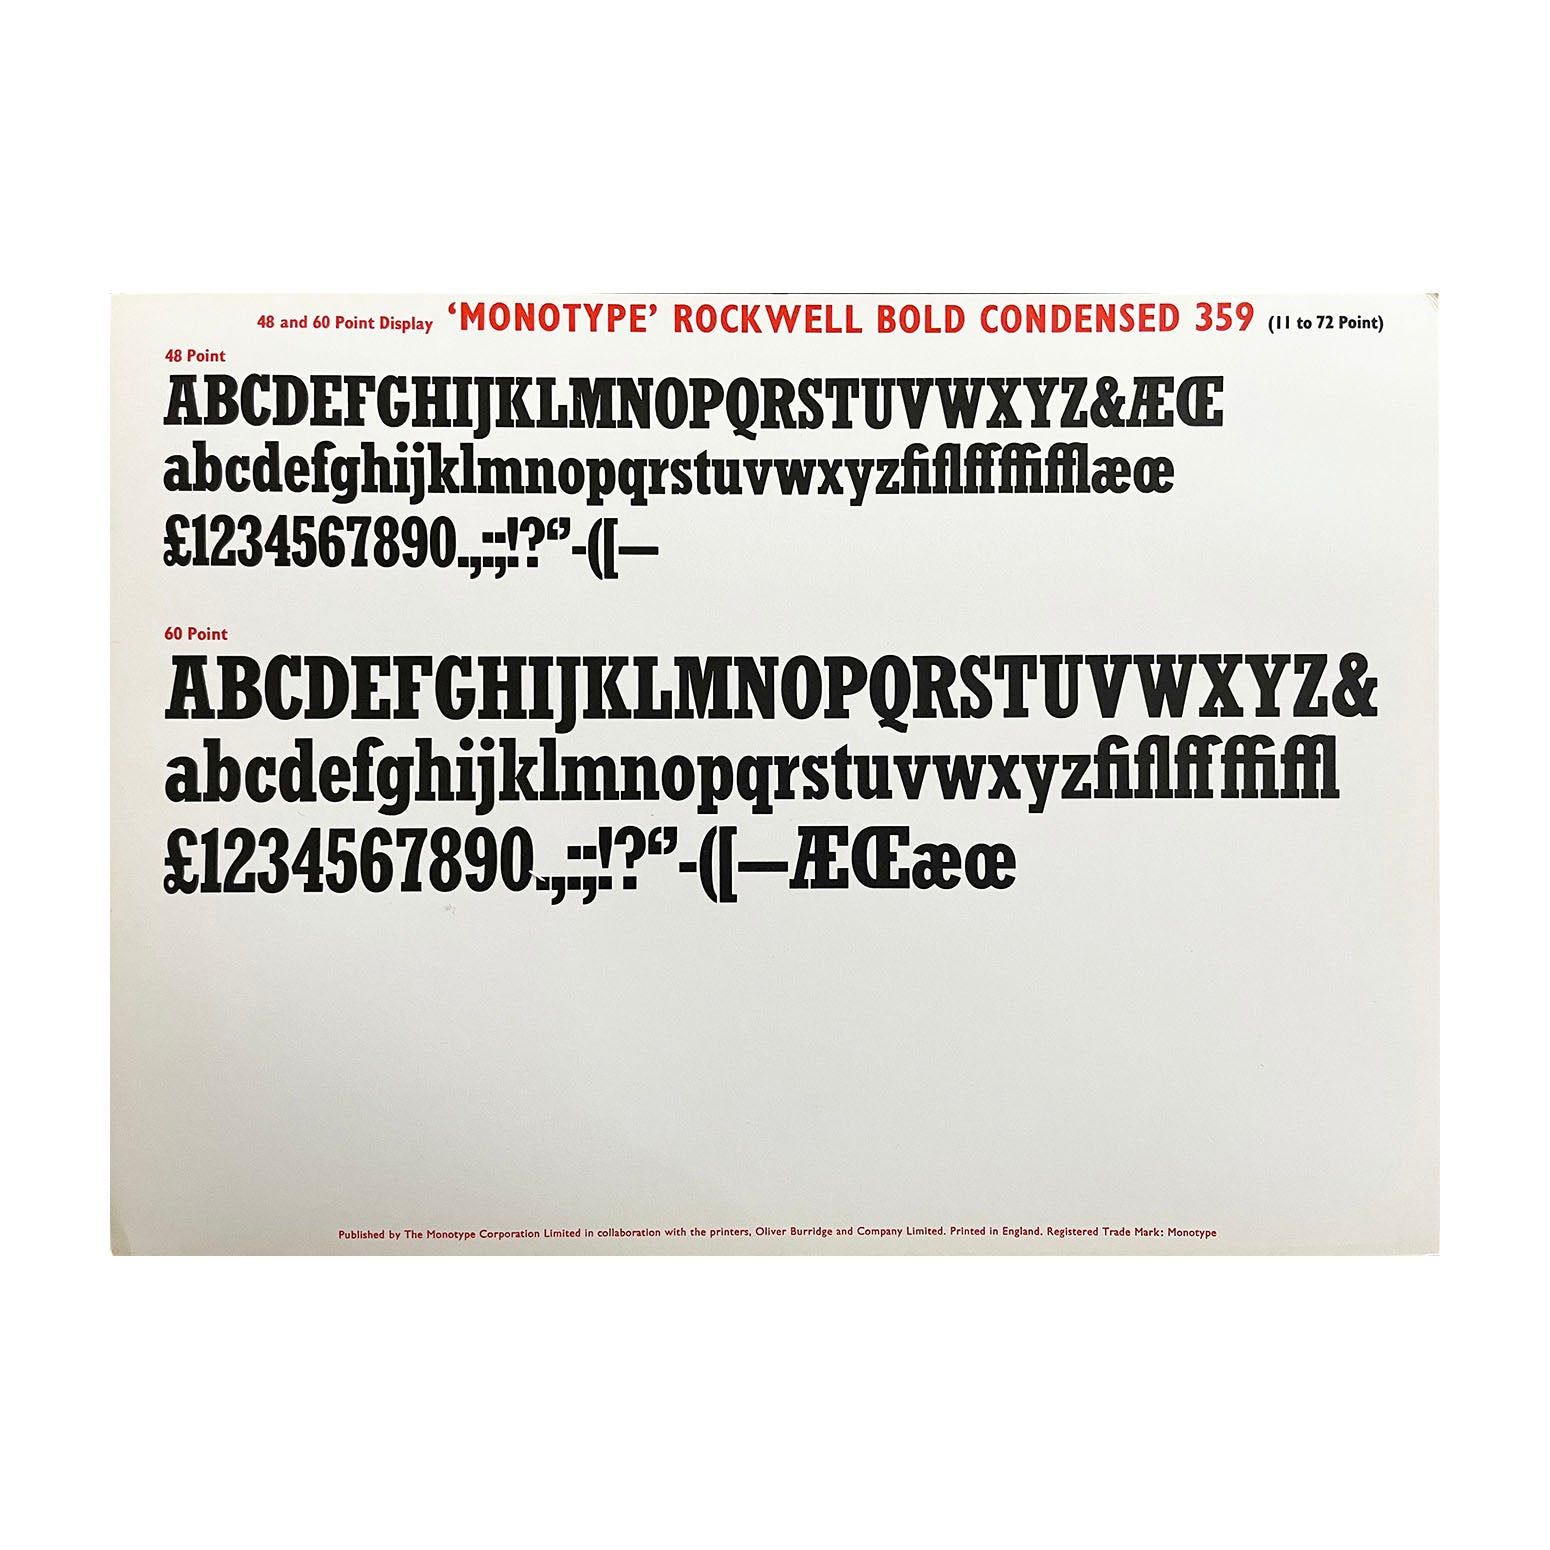 original printer’s sample sheet, Rockwell Bold Condensed 359 (11 to 72 Point), published by the Monotype Corporation Ltd